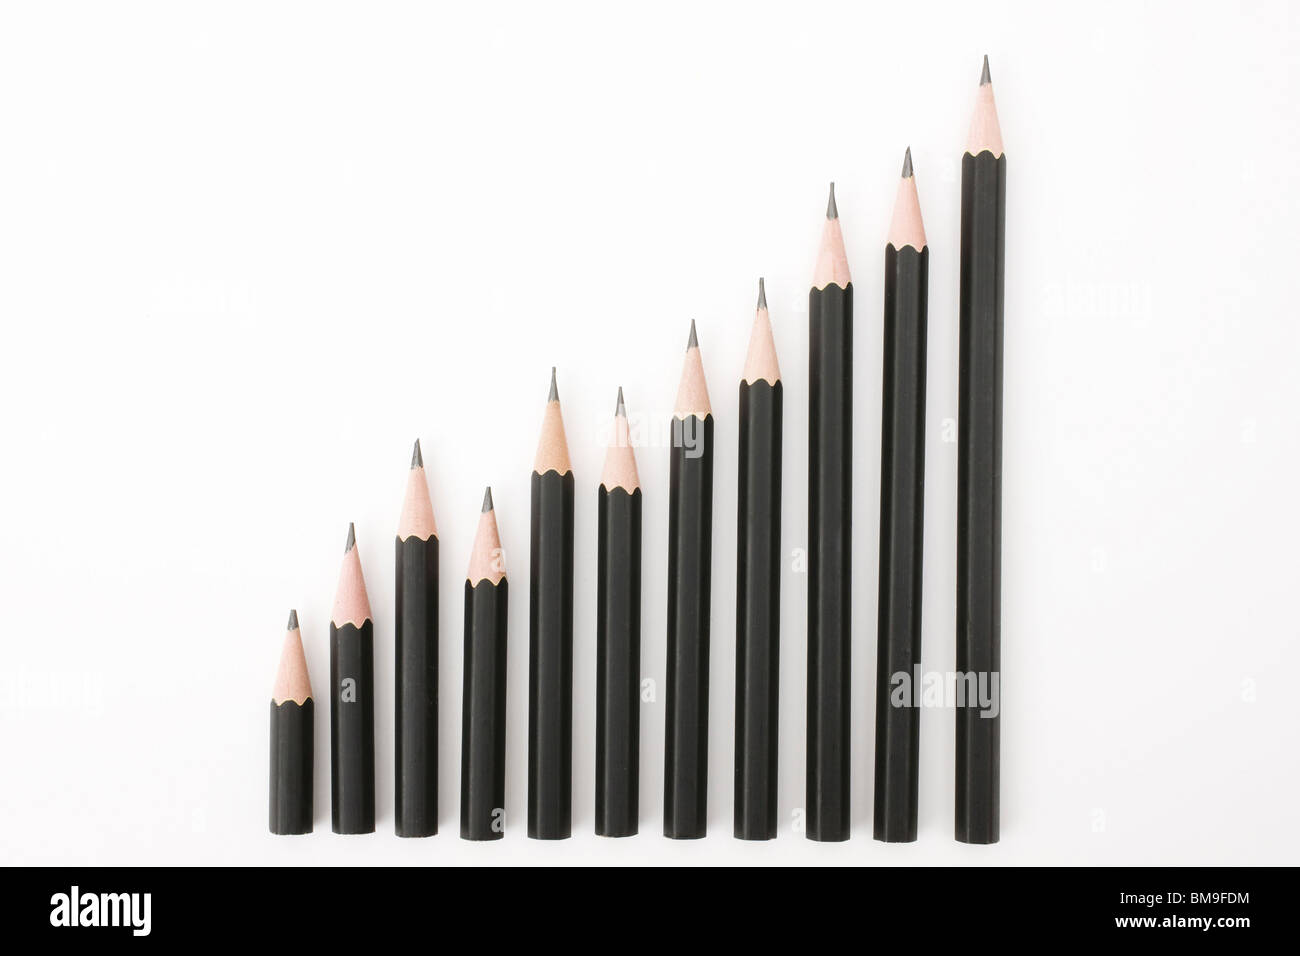 Pencils in increasing height order, white background Stock Photo